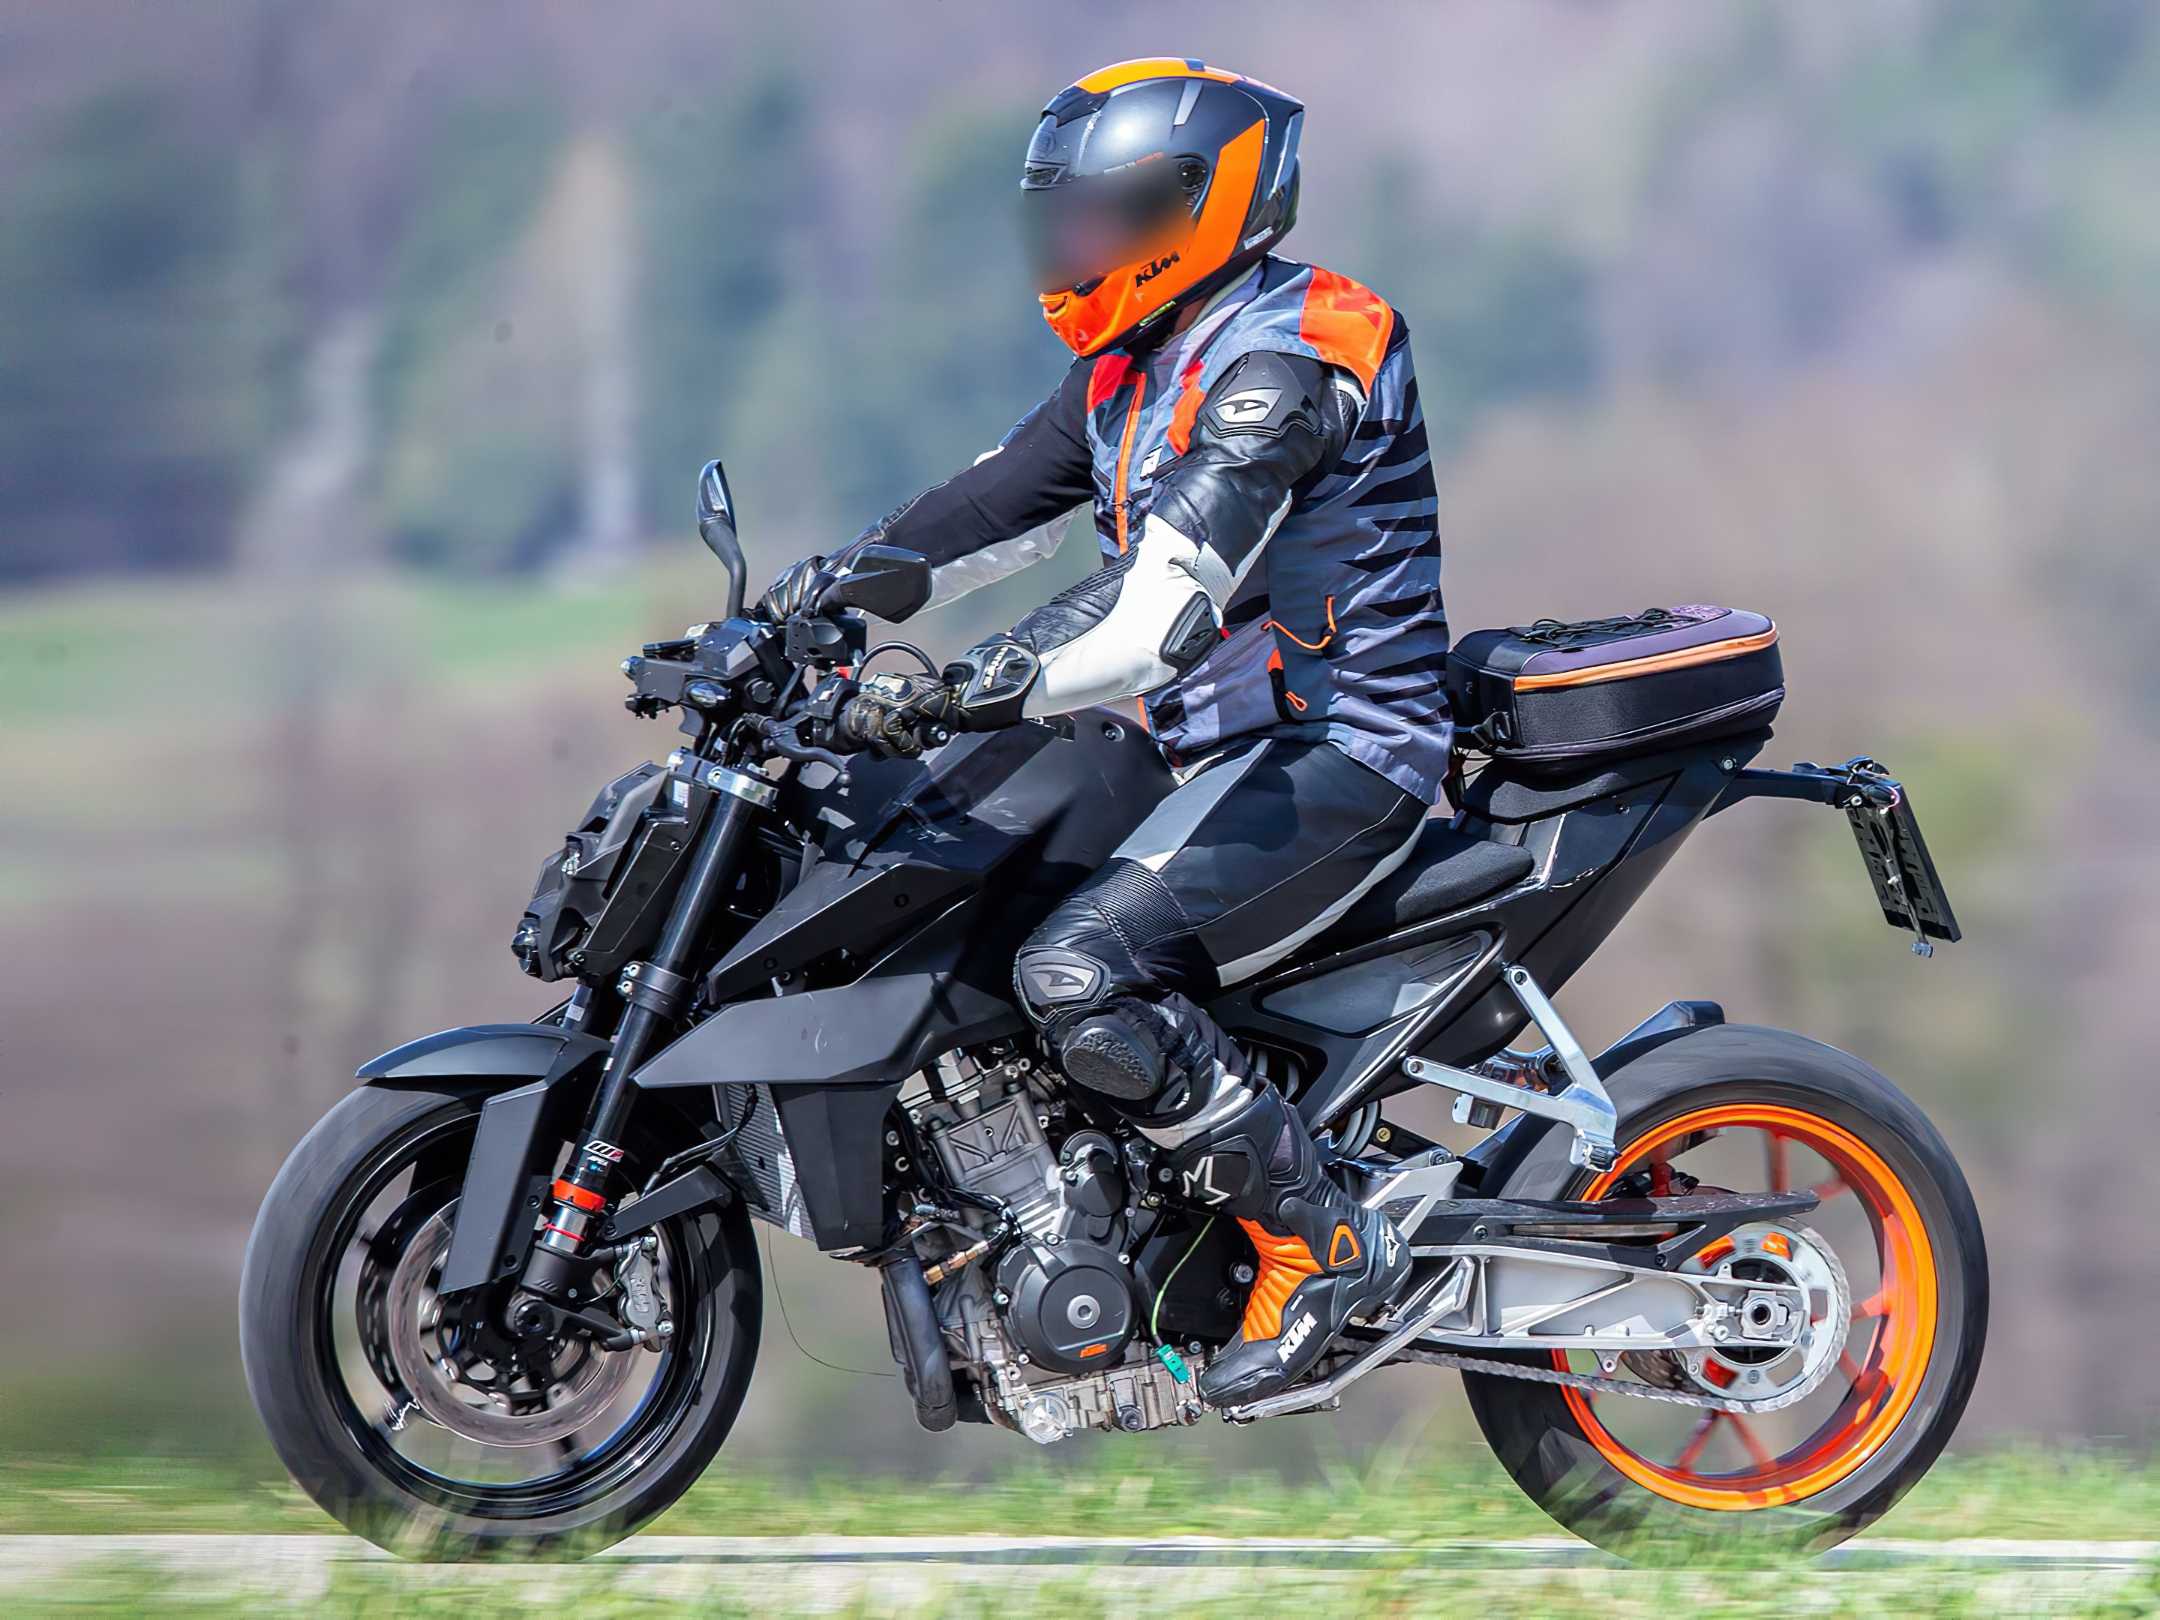 Future KTM 990 Duke spotted in tests - MOTORCYCLES.NEWS